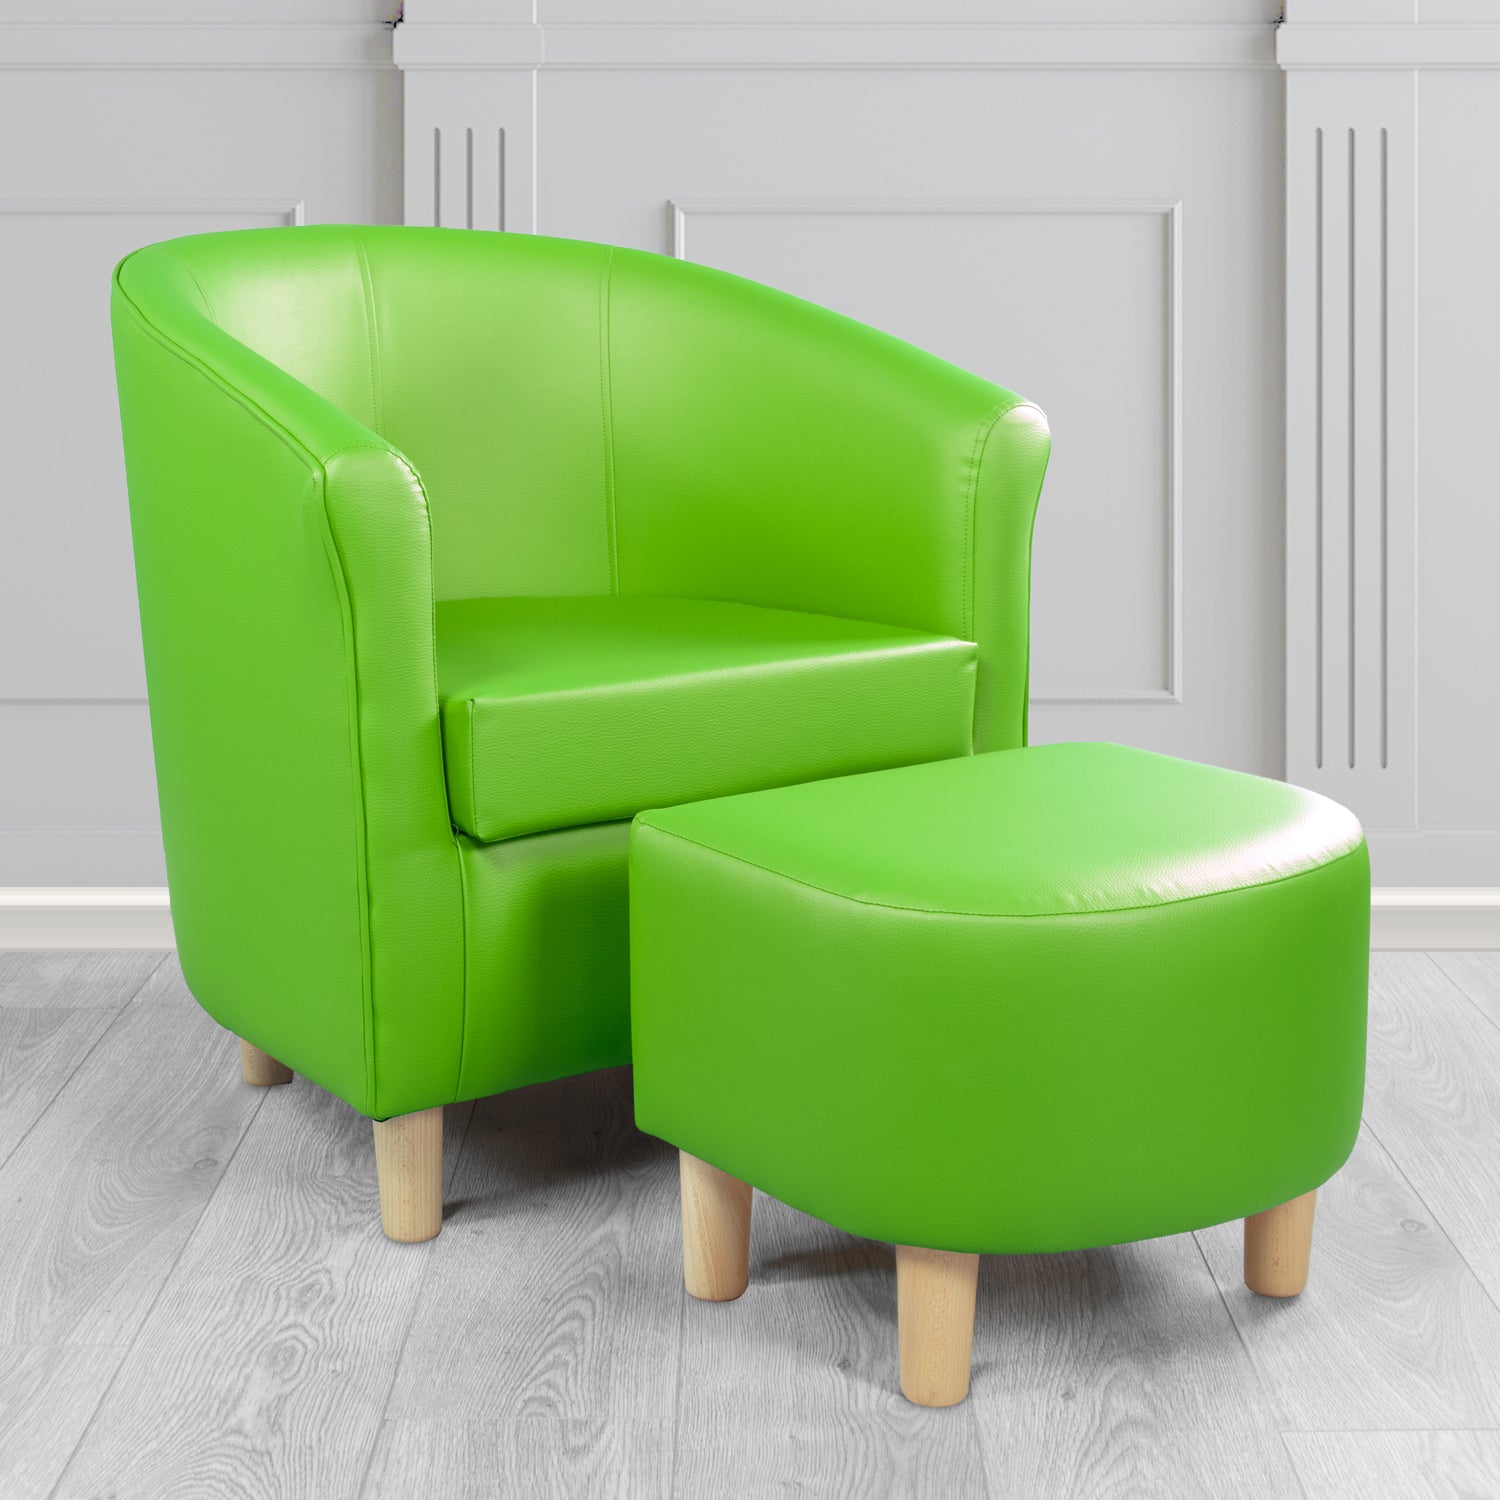 Tuscany Tub Chair with Footstool Set in Madrid Lime Faux Leather - The Tub Chair Shop